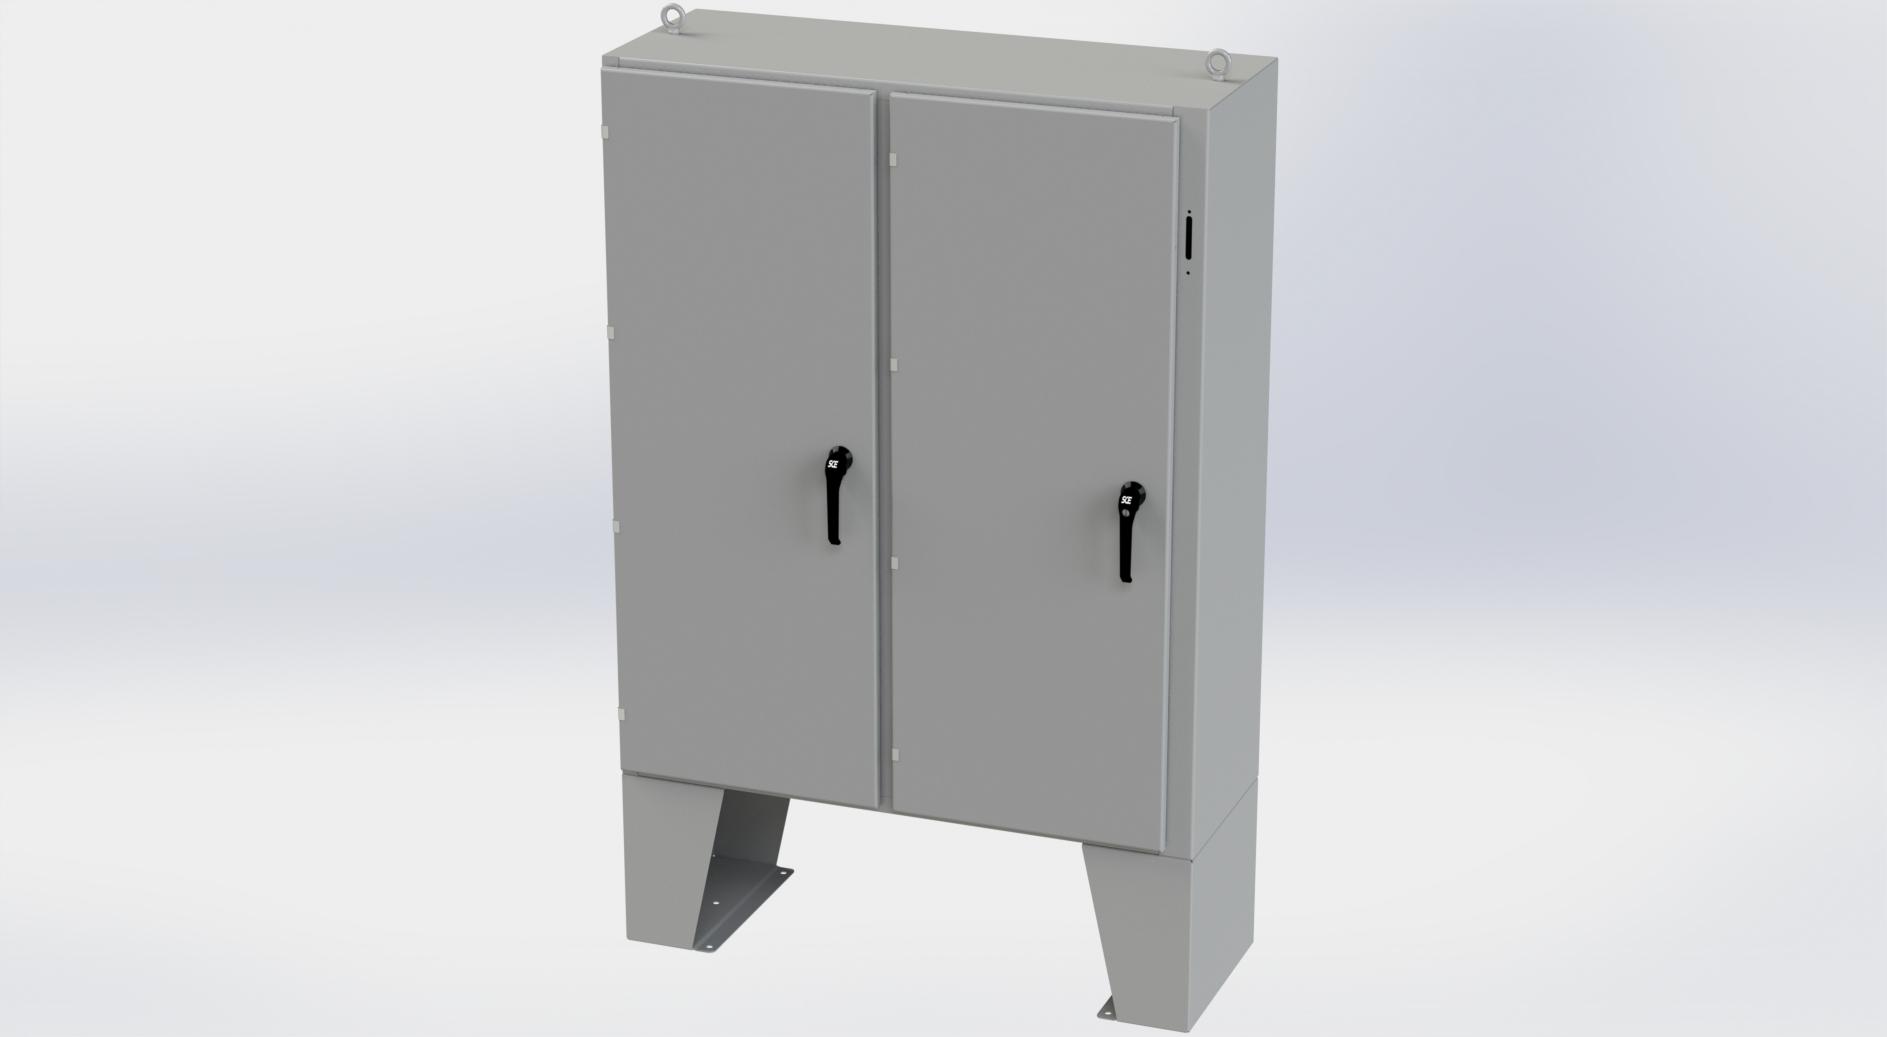 Saginaw Control SCE-60XEL4918LP 2DR XEL Enclosure, Height:60.00", Width:49.00", Depth:18.00", ANSI-61 gray powder coating inside and out. Optional sub-panels are powder coated white.